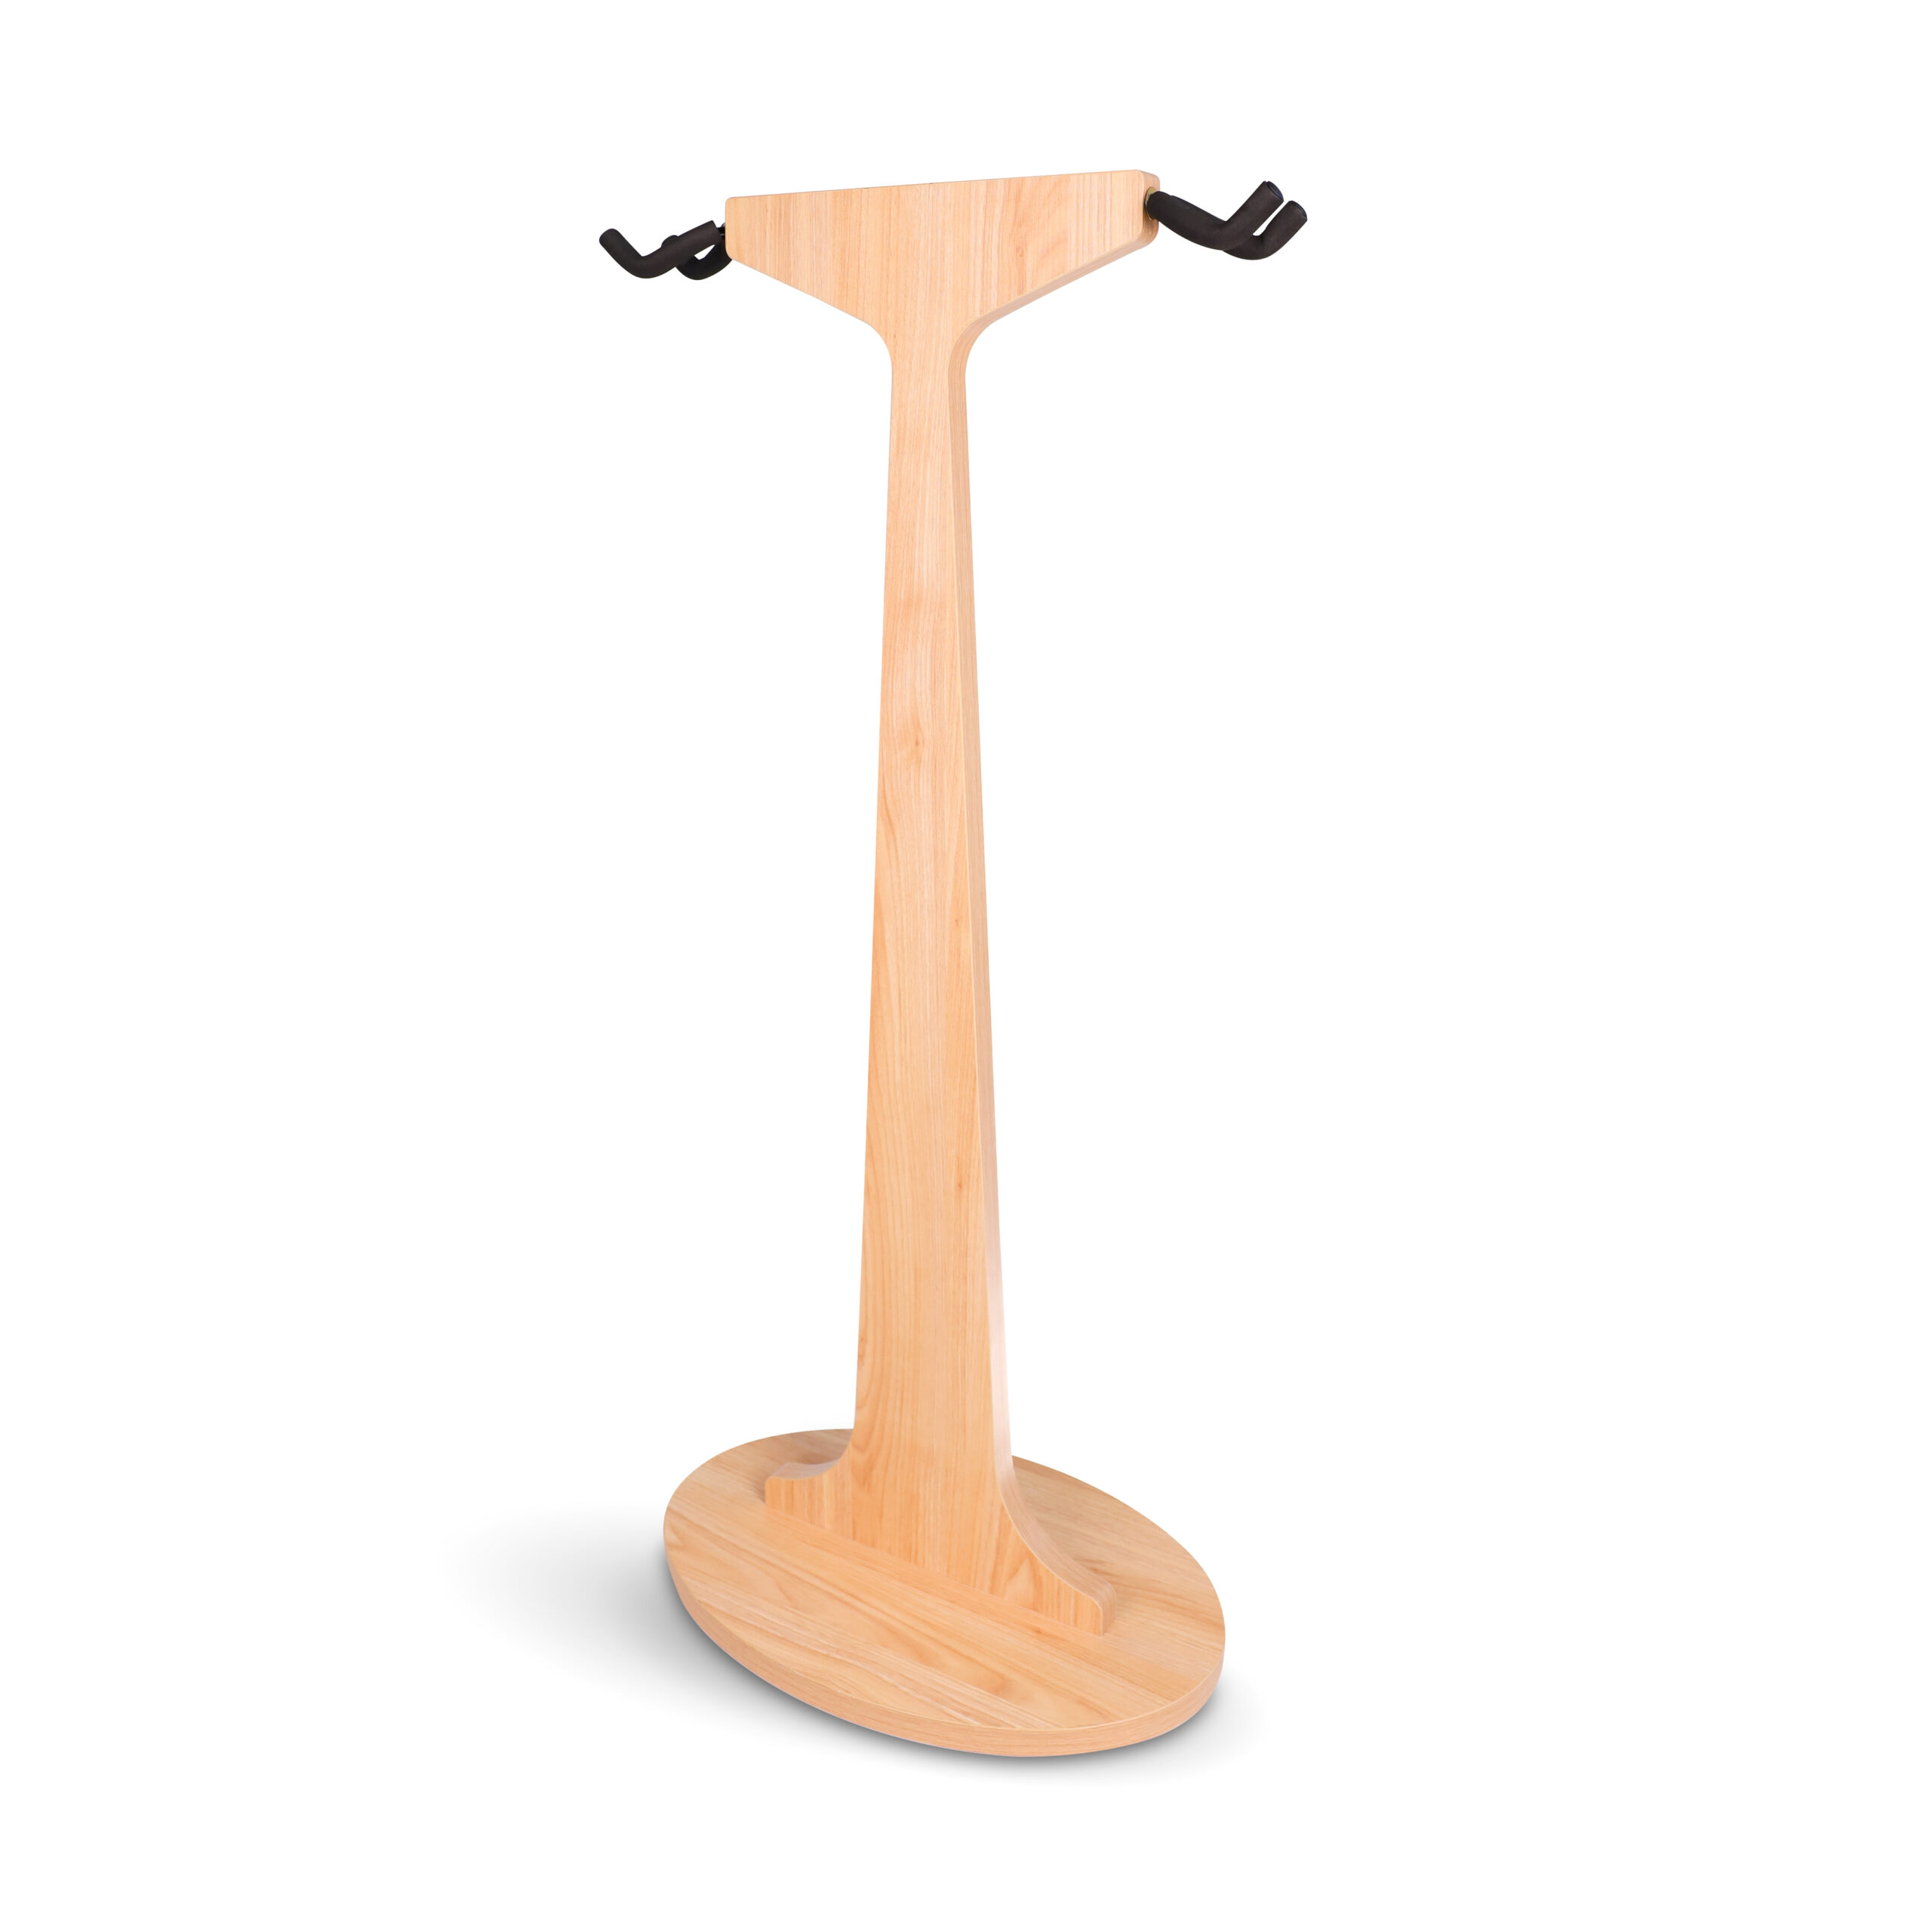 Elite Series 2X Guitar Hanging Stand, Maple Finish